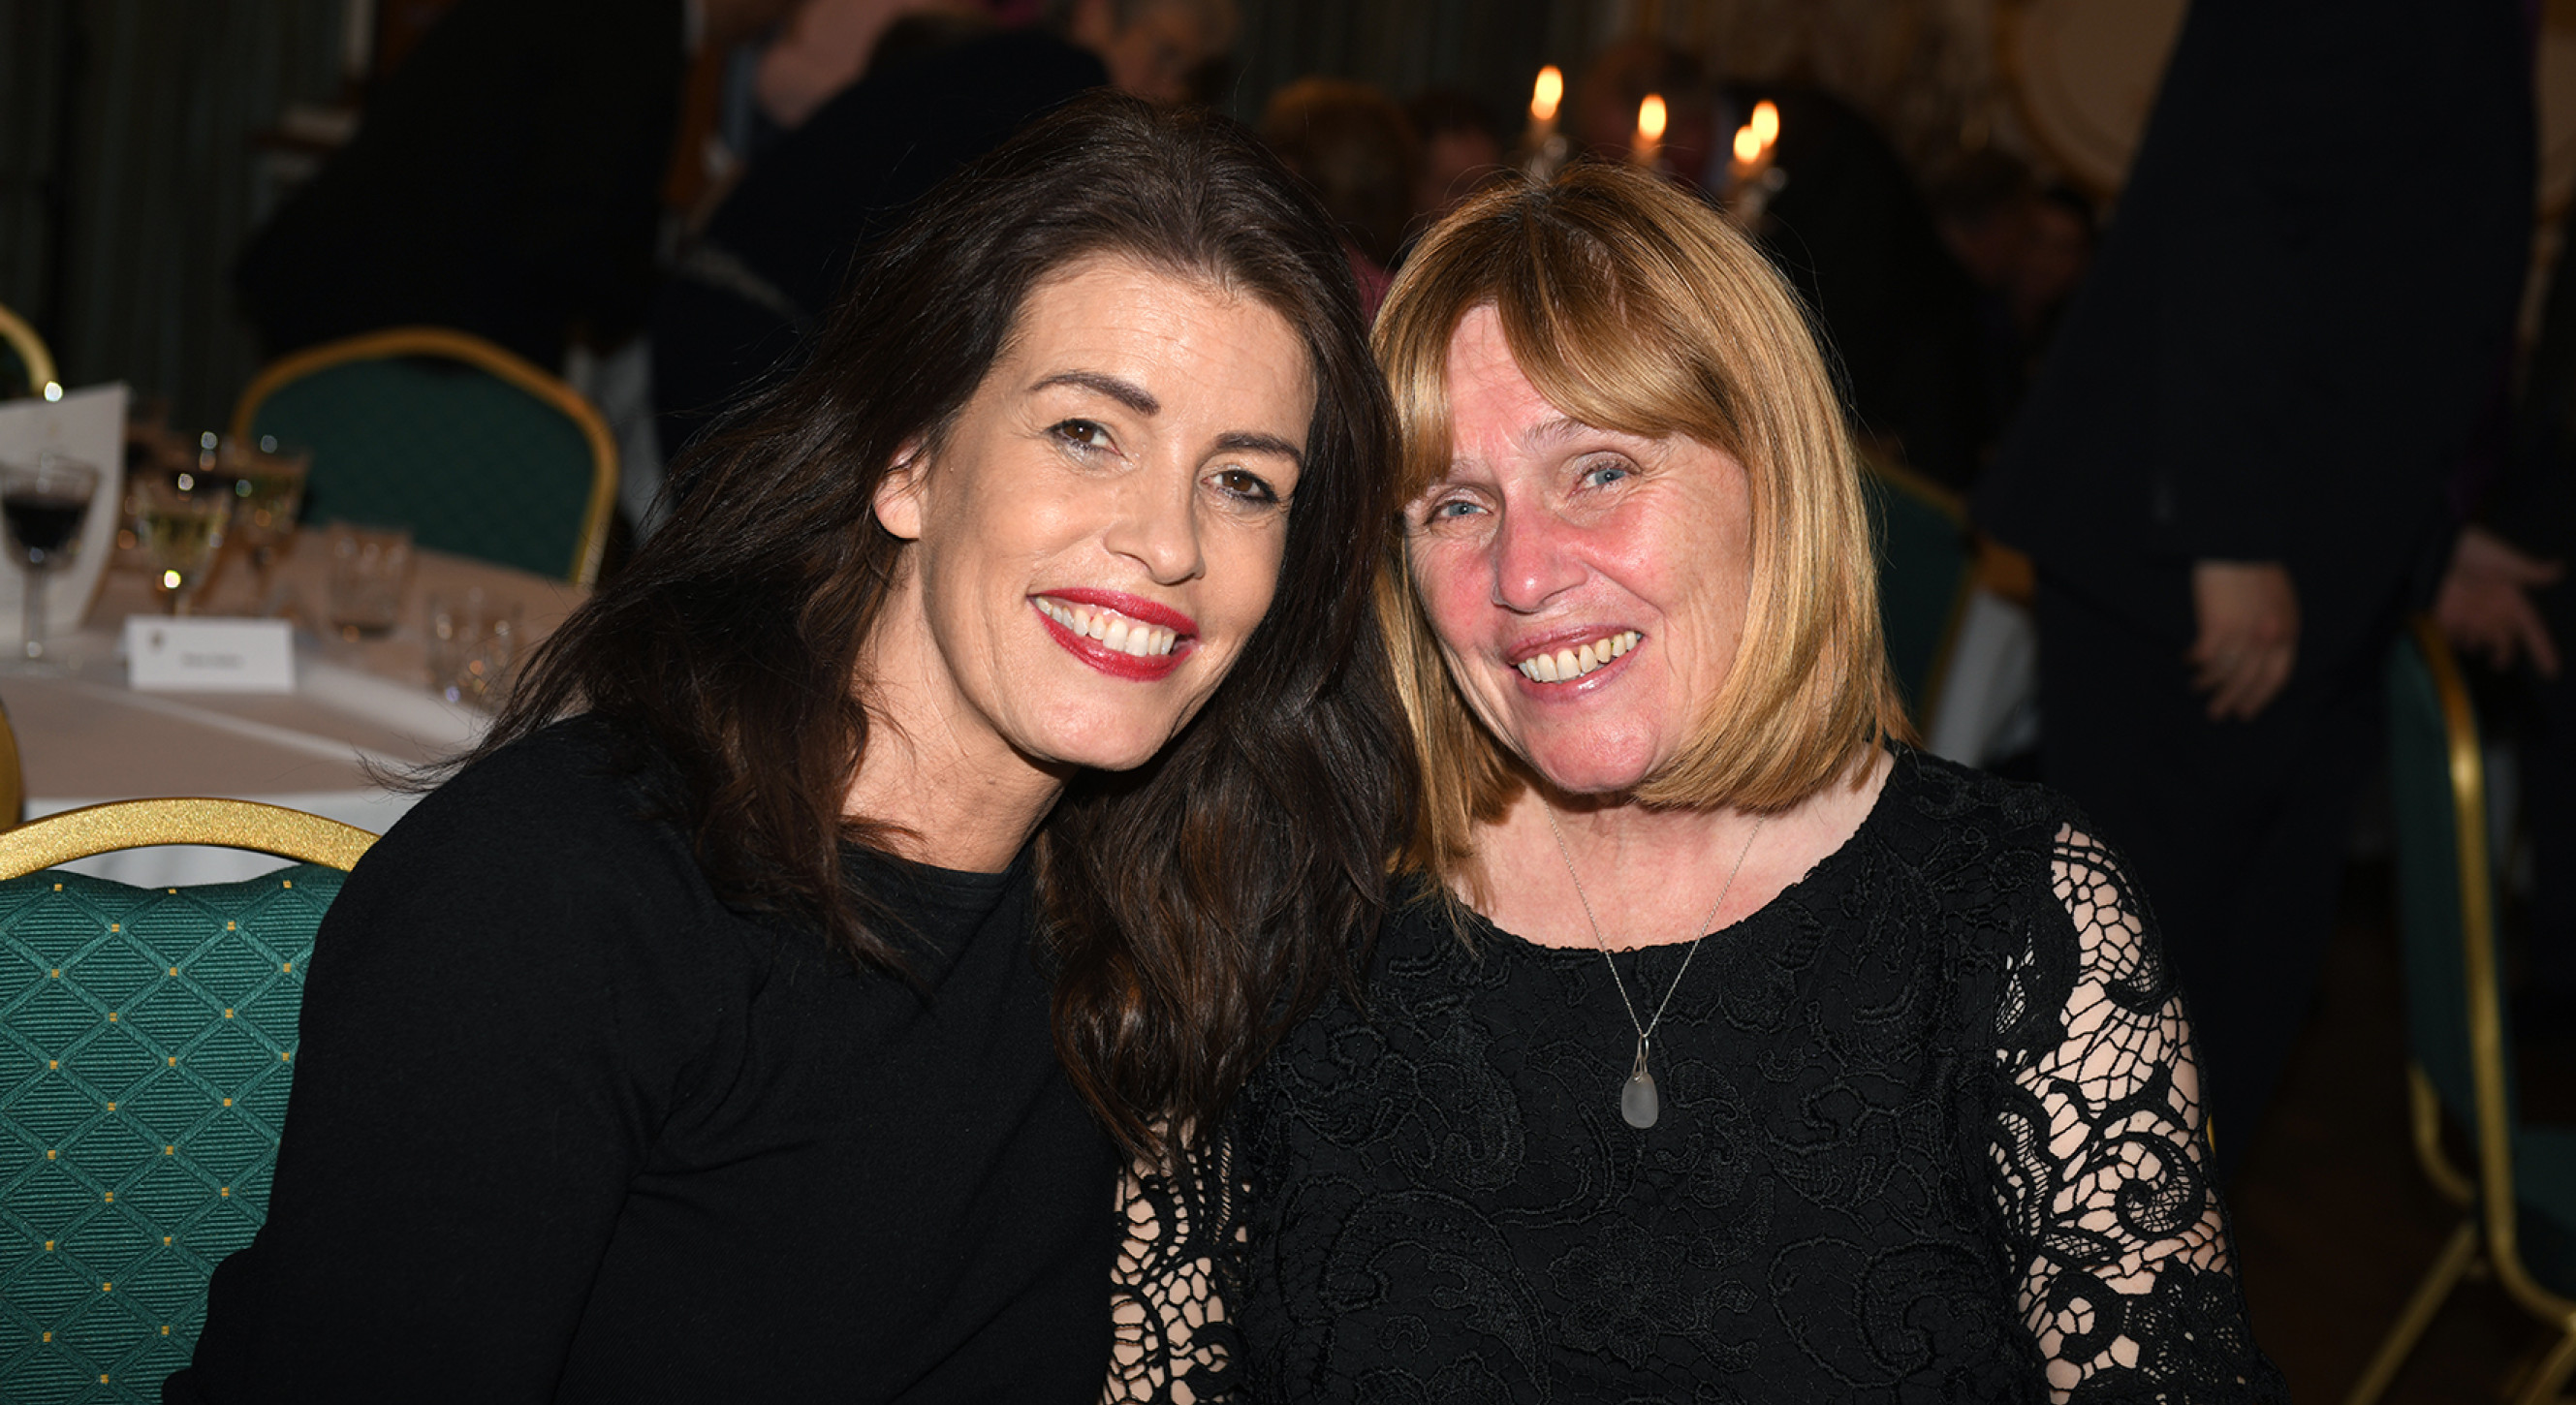 Catherina Casey and Breege McDaid.